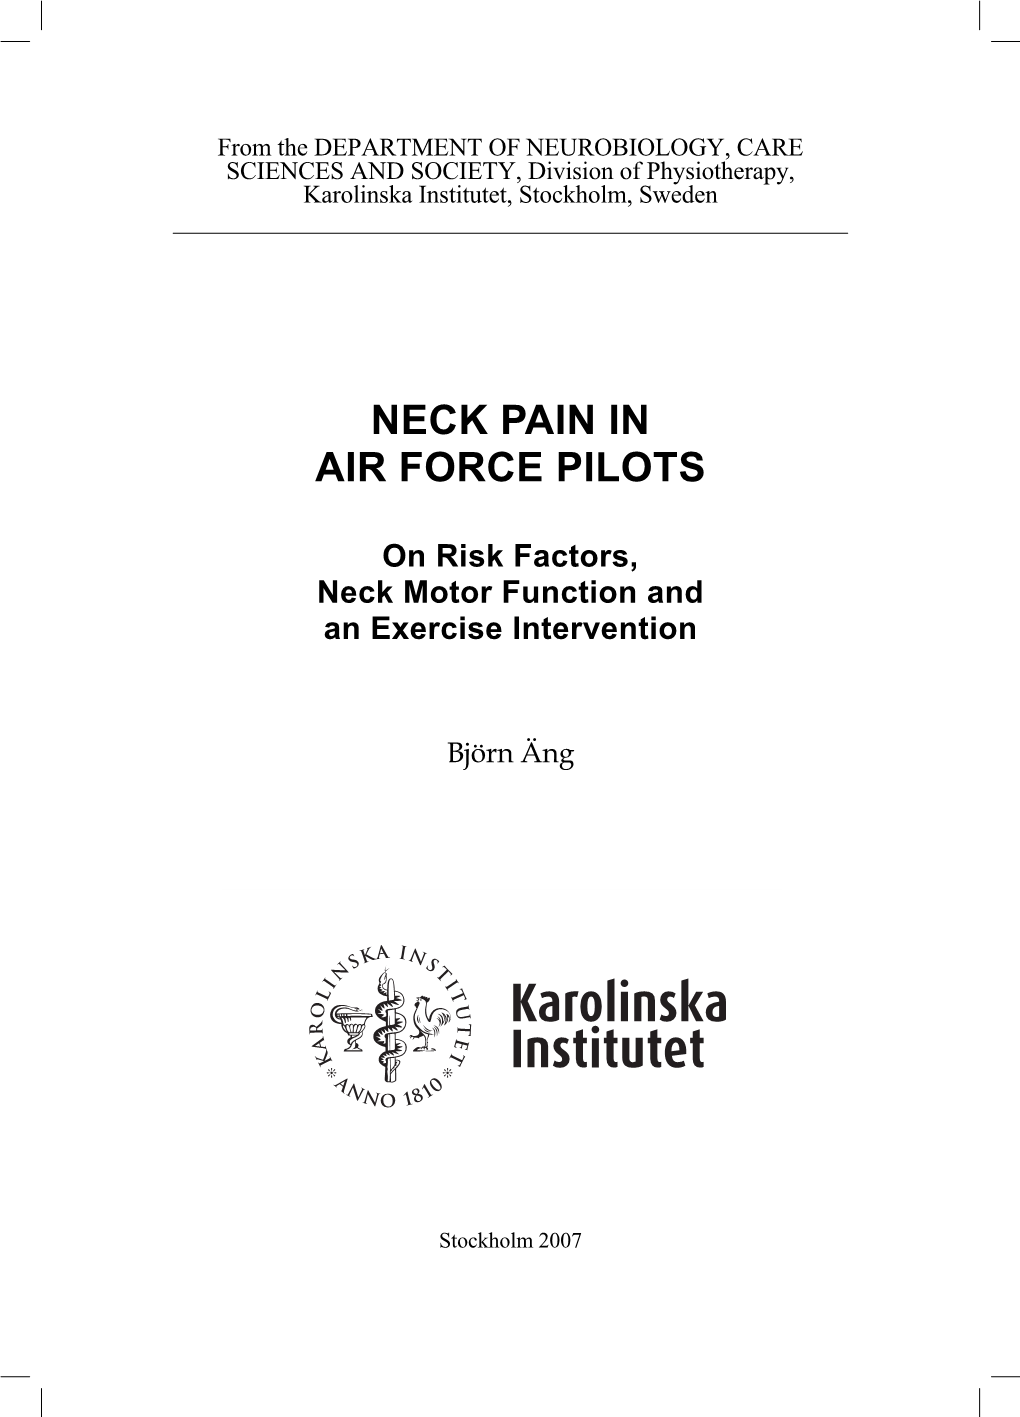 Neck Pain in Air Force Pilots